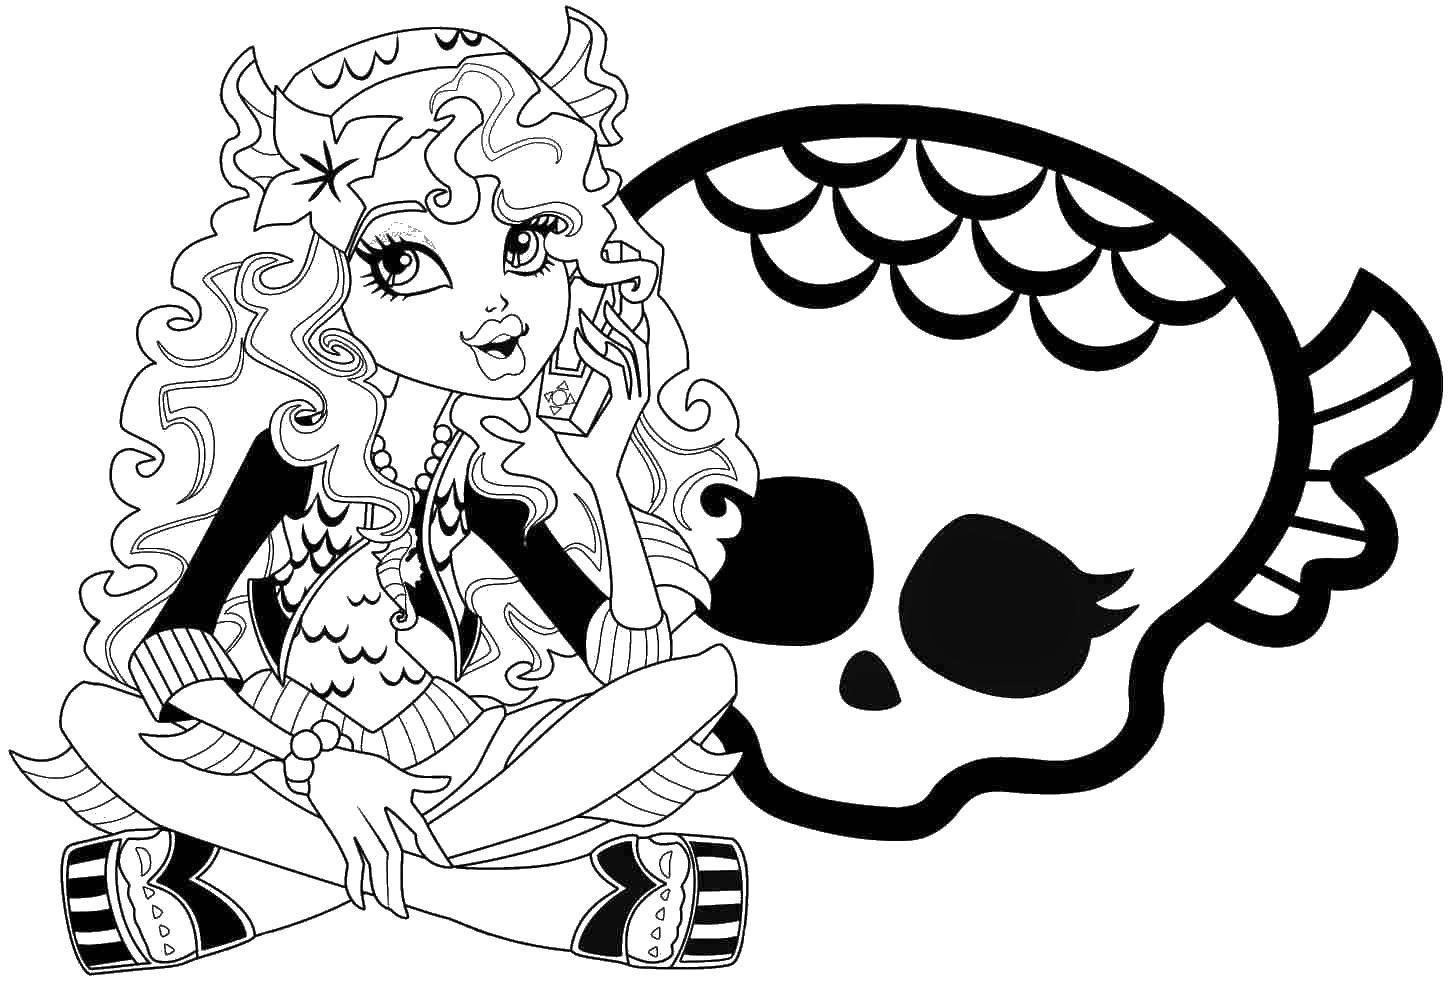 Coloring Monster high doll in the background of the skull. Category Monster high. Tags:  Monster high, doll, cartoon, skull.